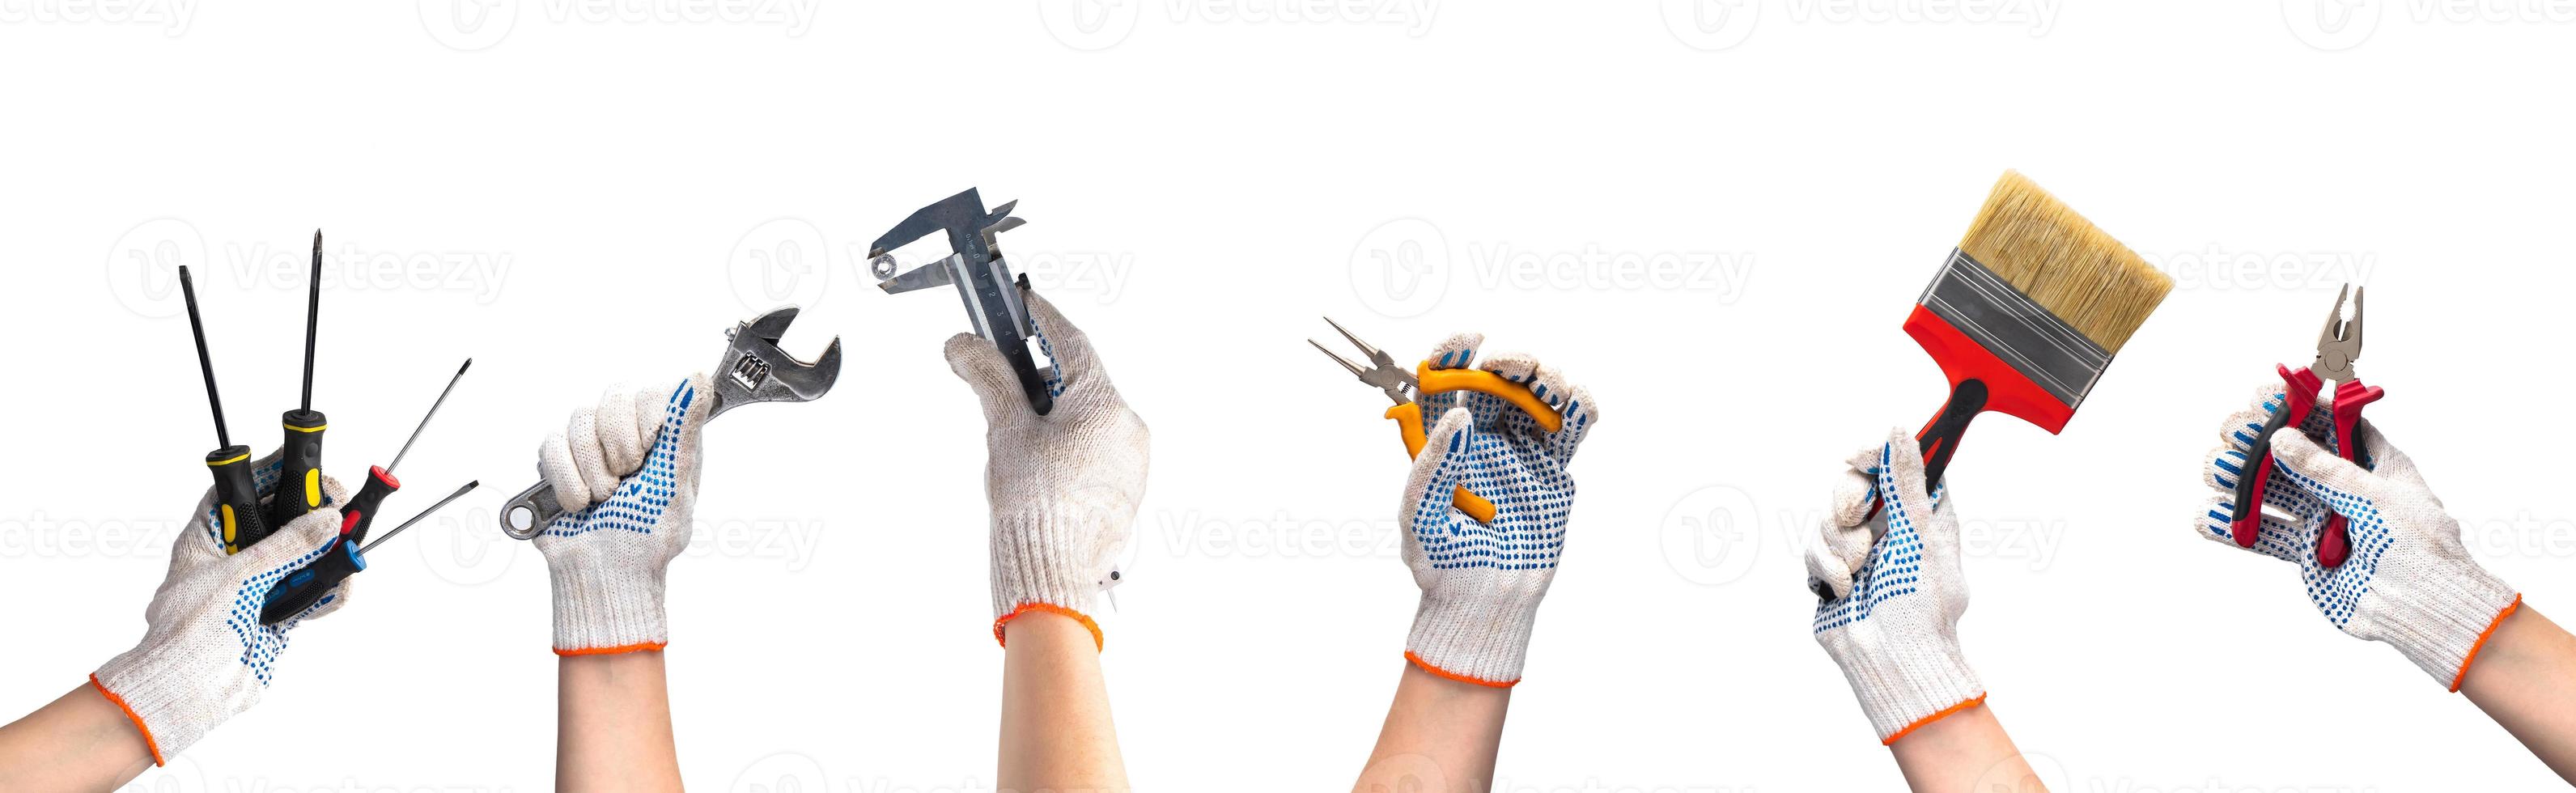 Hands in work gloves hold repair tools. photo